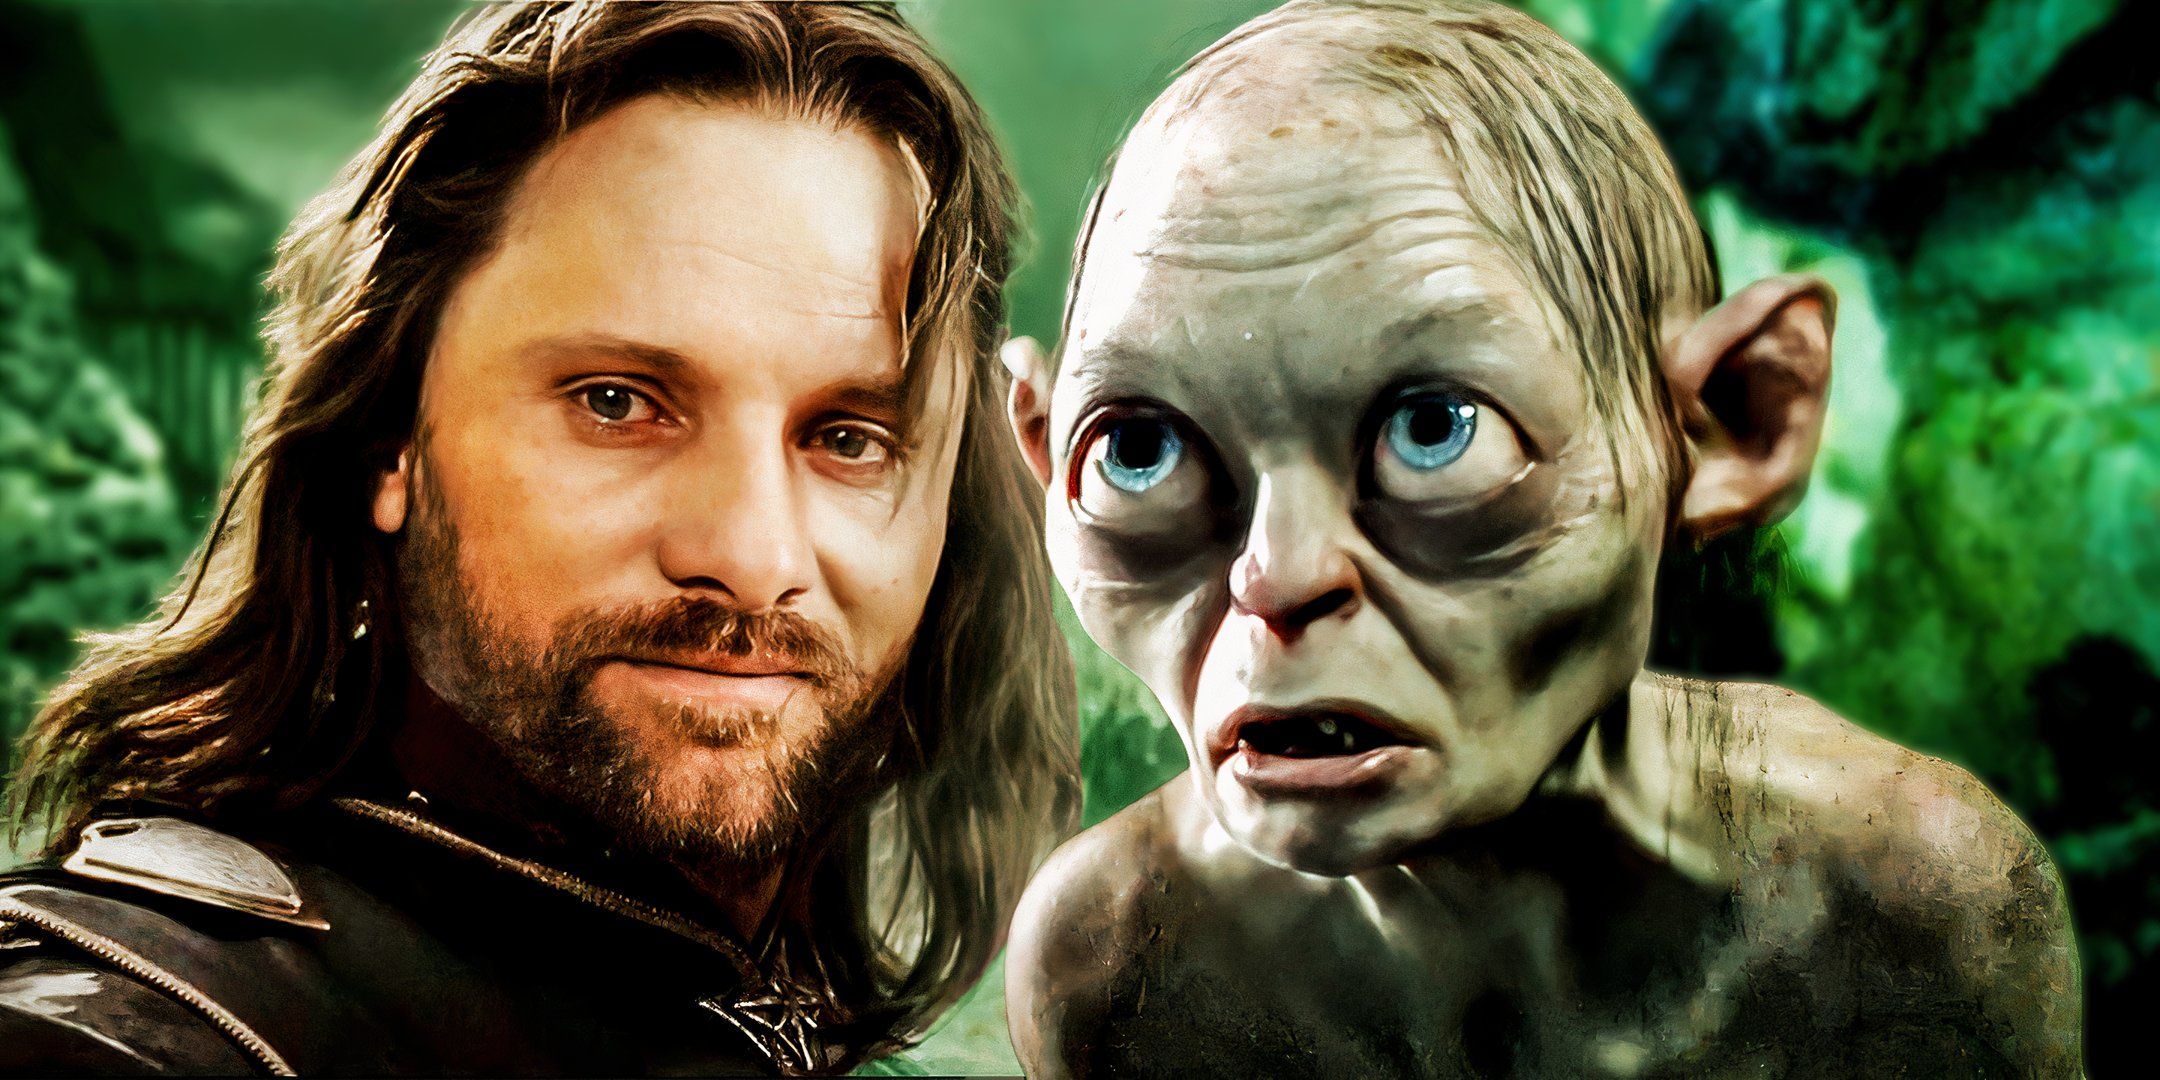 Gollum-and-Aragorn-from-Lord-Of-The-Rings-Franchise